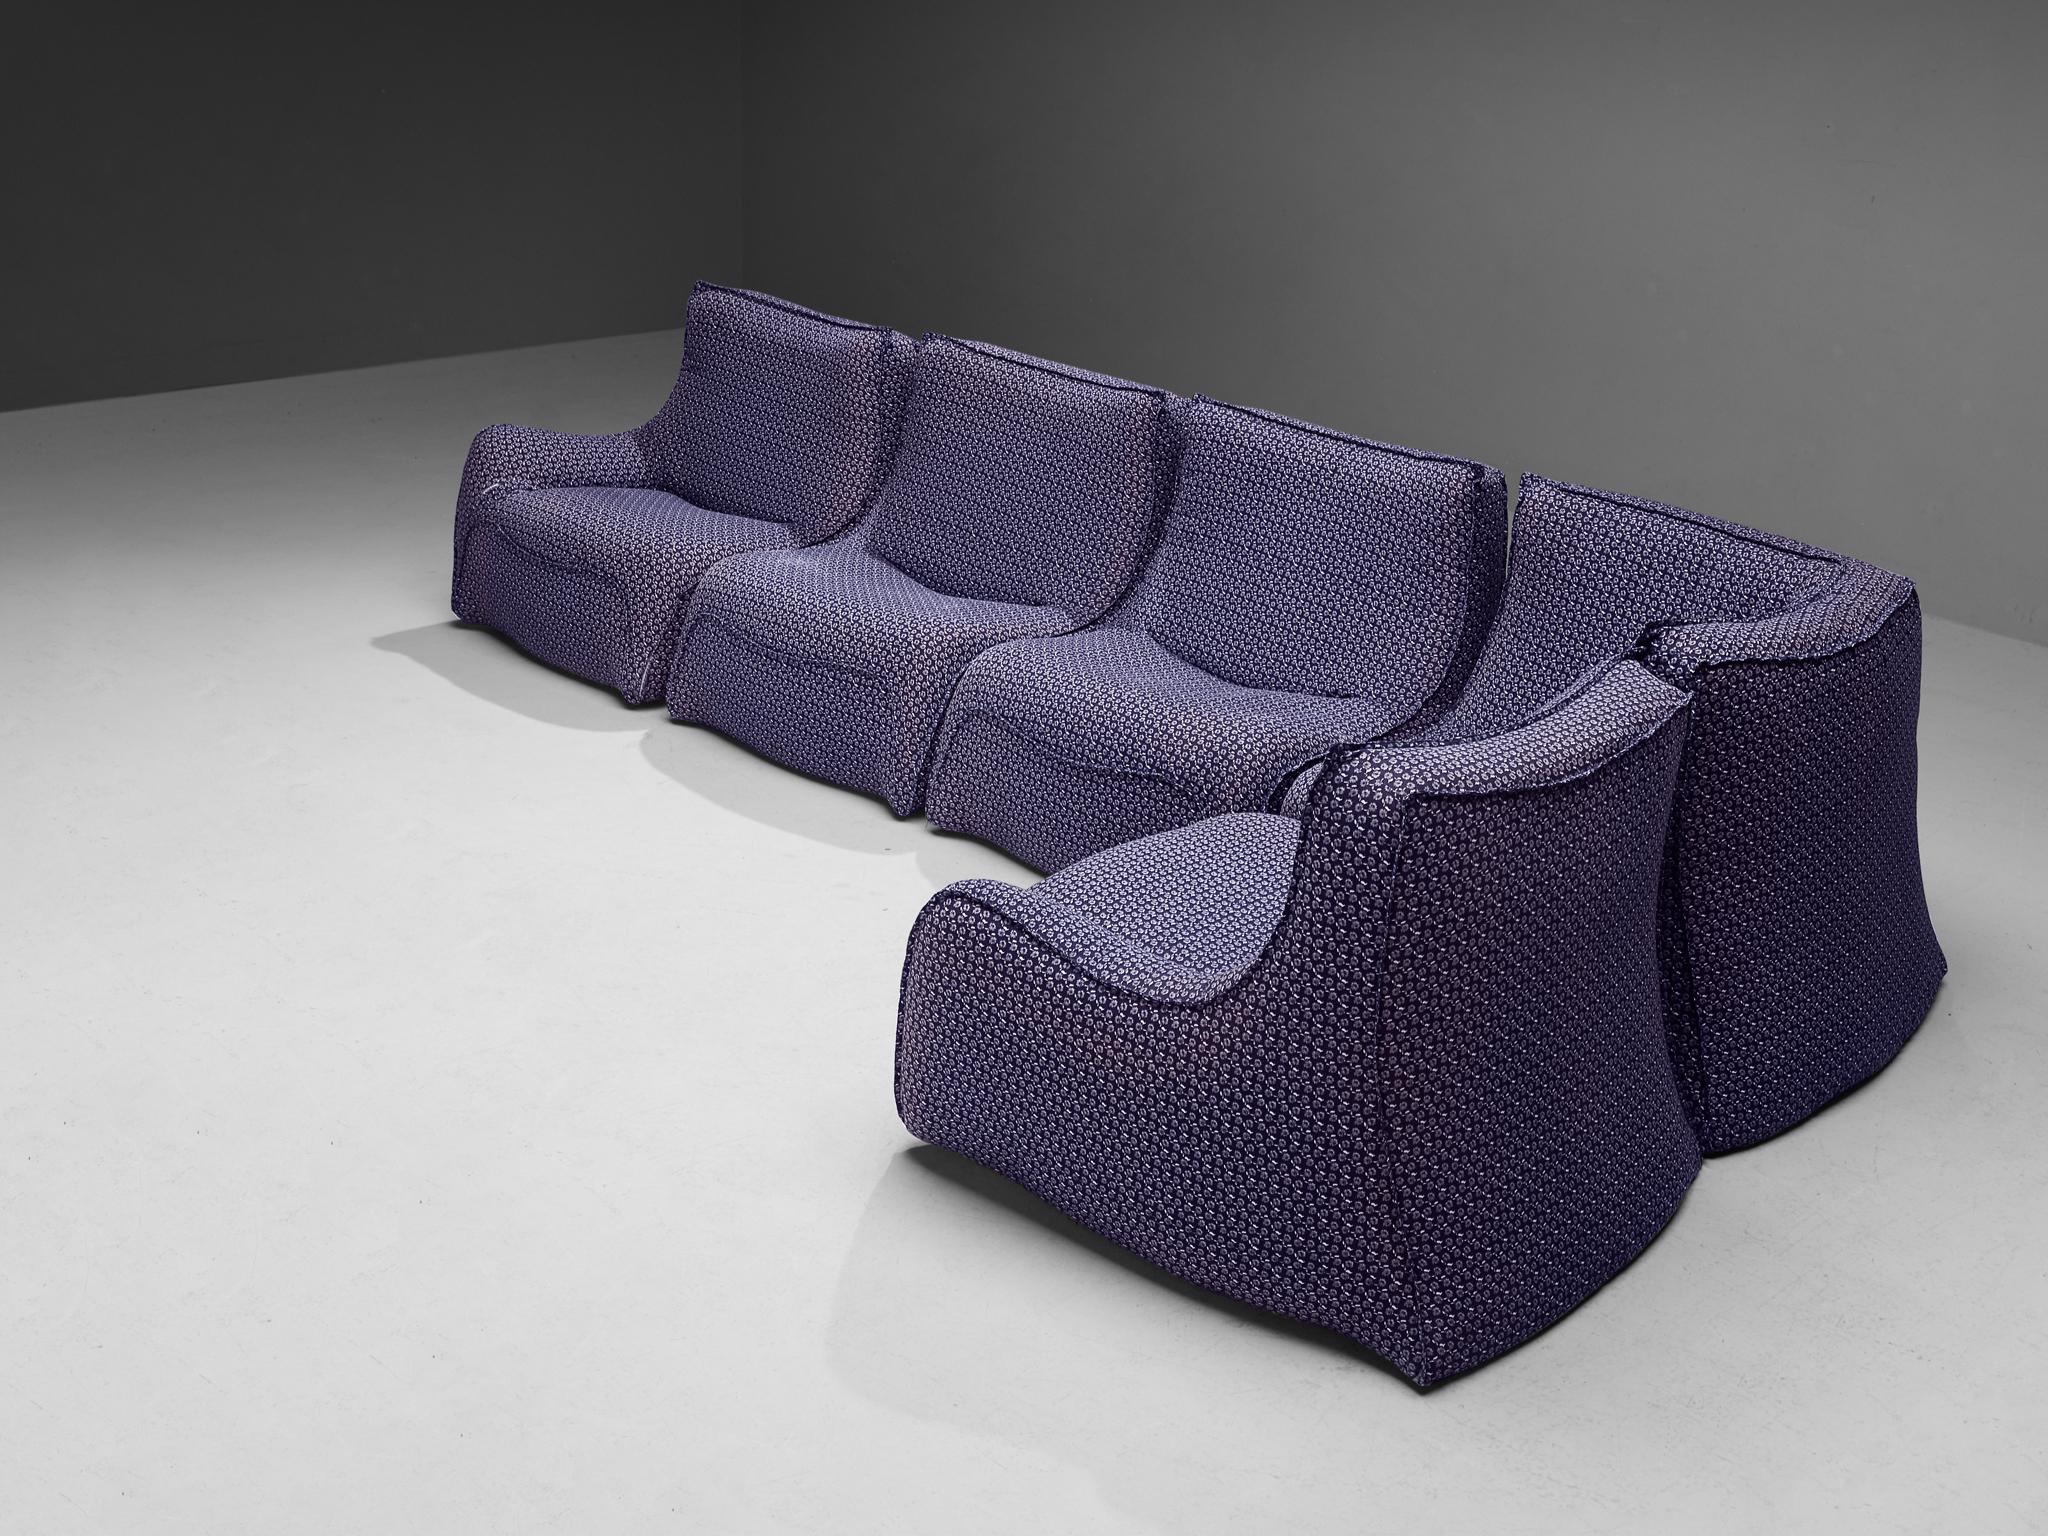 Bernard Govin for Ligne Roset, sectional sofa, fabric, foam, France, 1970s

This extremely rare modular sofa is designed by Bernard Govin for Ligne Roset. This organically shaped sofa is executed in a fresh purple fabric with subtle white flower